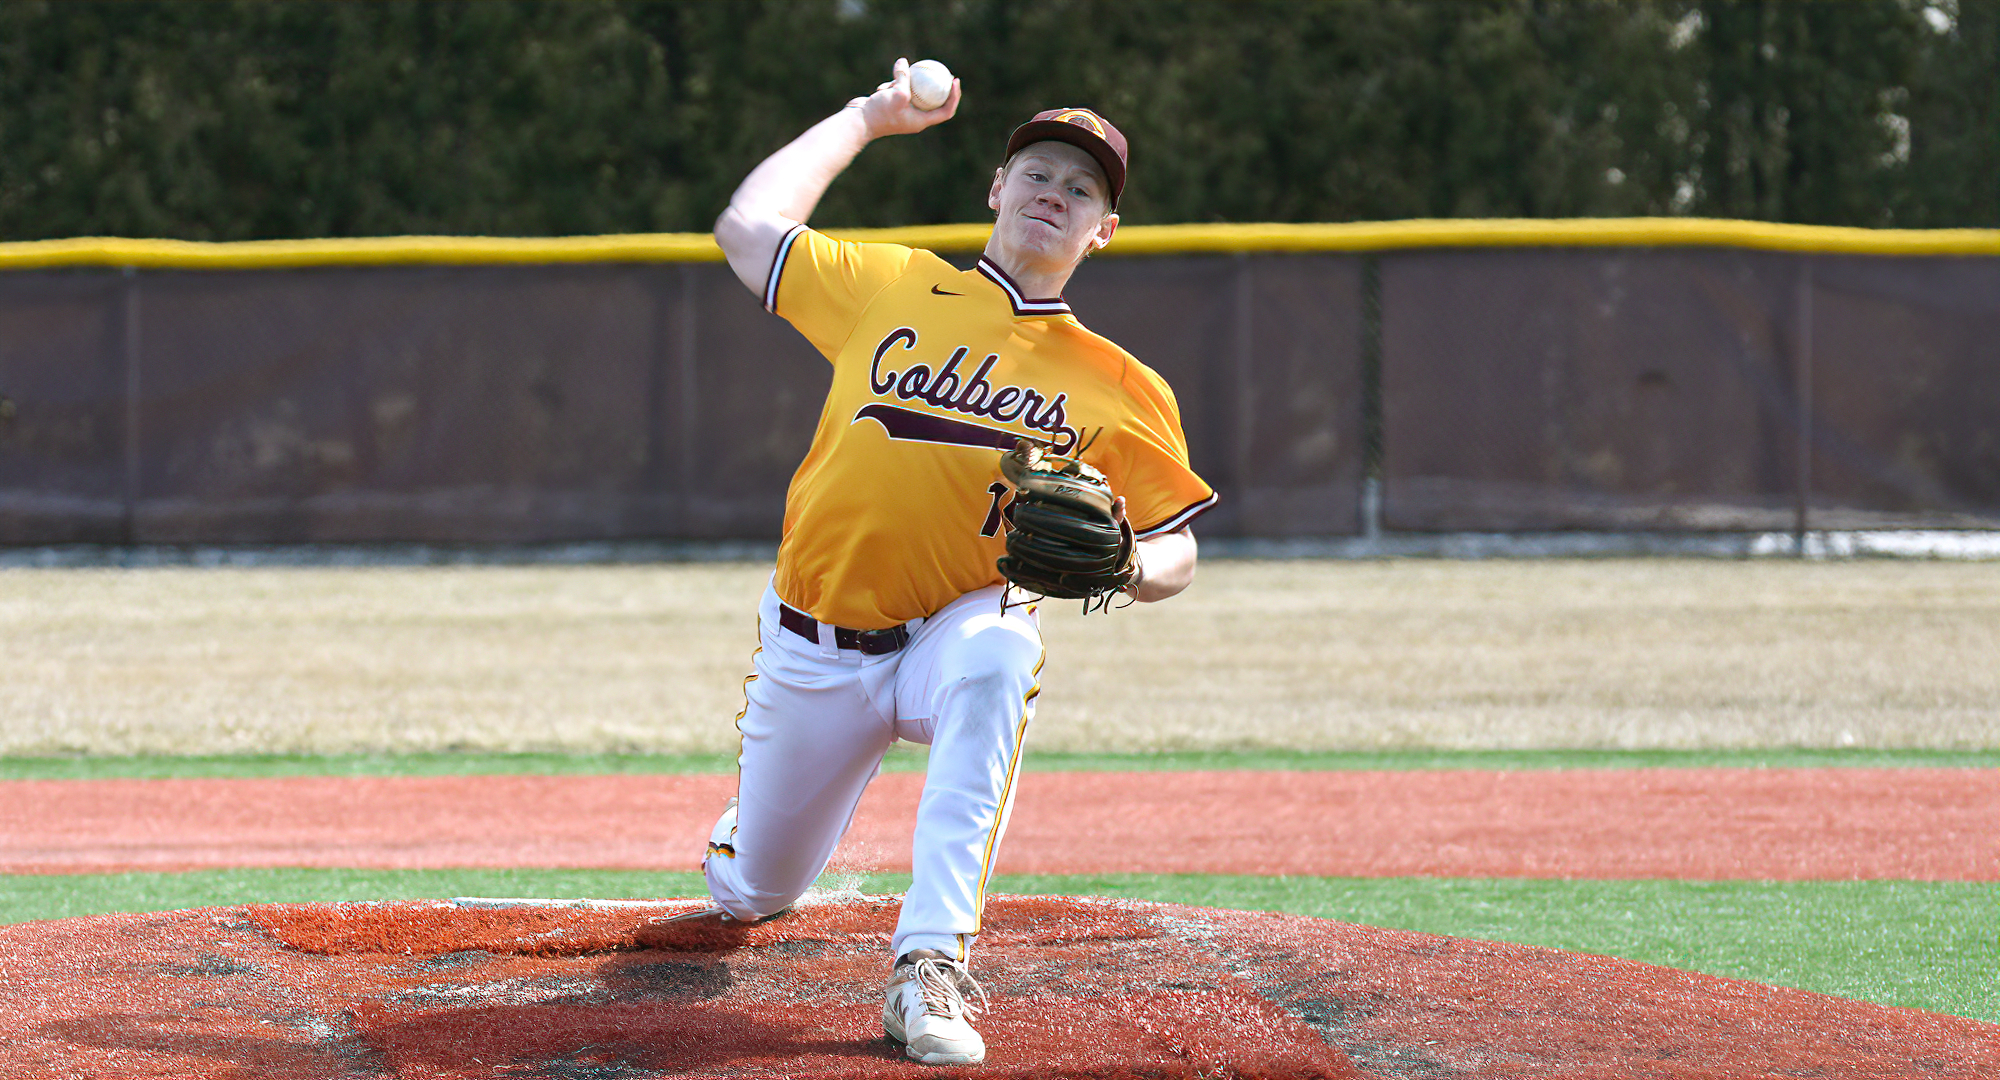 Freshman Jacoby Nold delivers a pitch during his complete-game, 2-hitter in the Cobbers' sweep over Hamline.